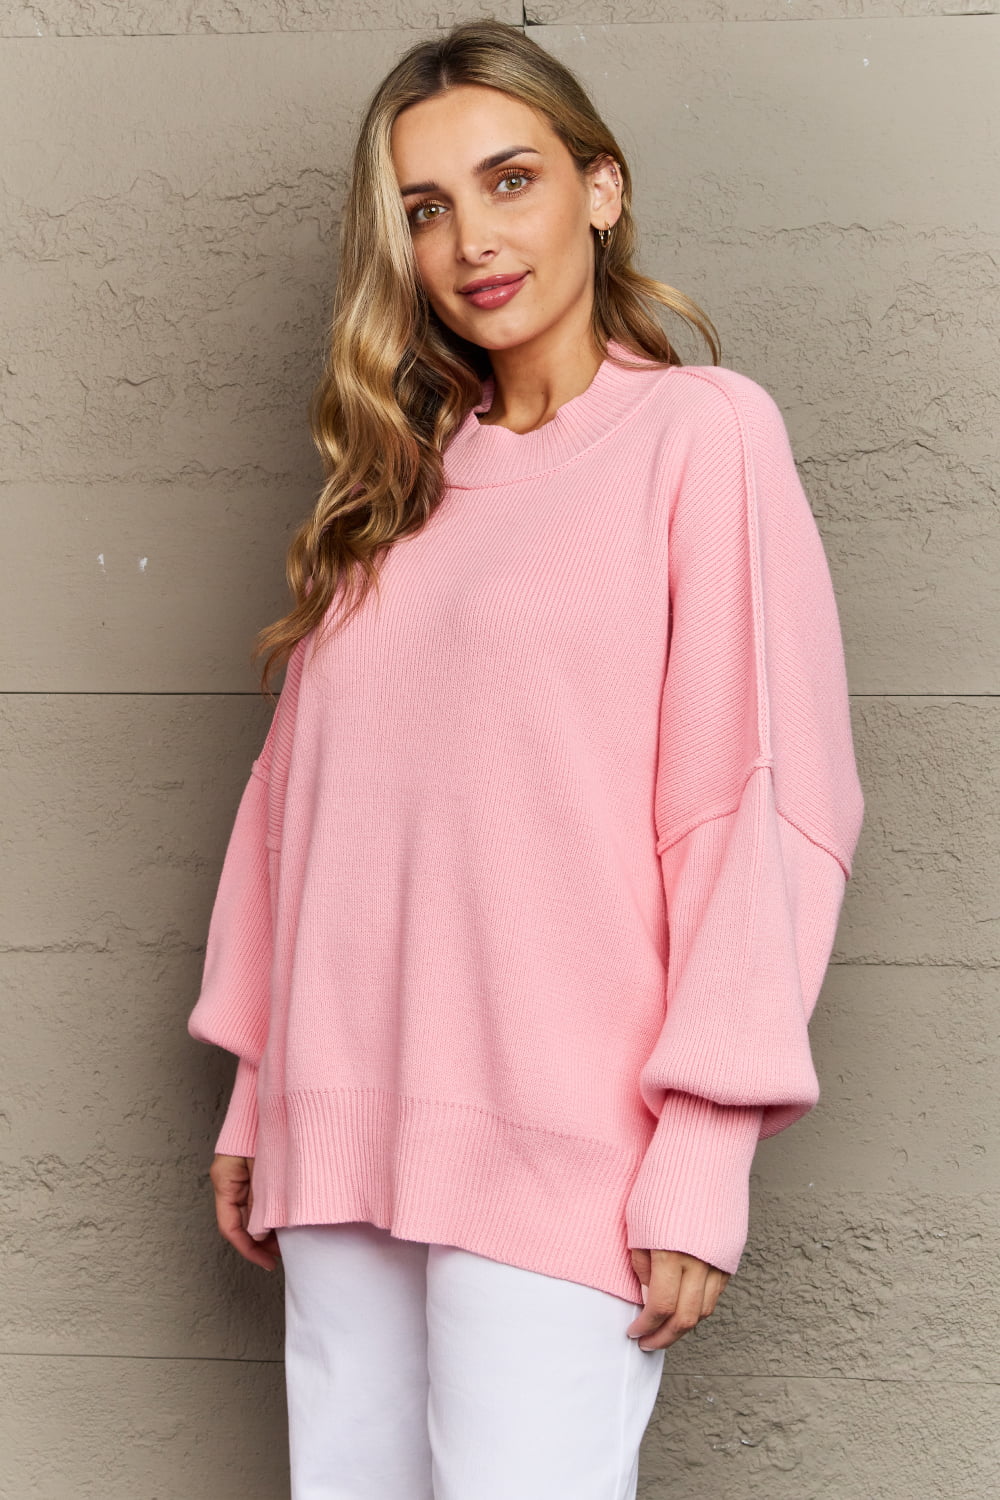 Zenana Comfort Awaits Slouchy Side Slit Sweater in Pink